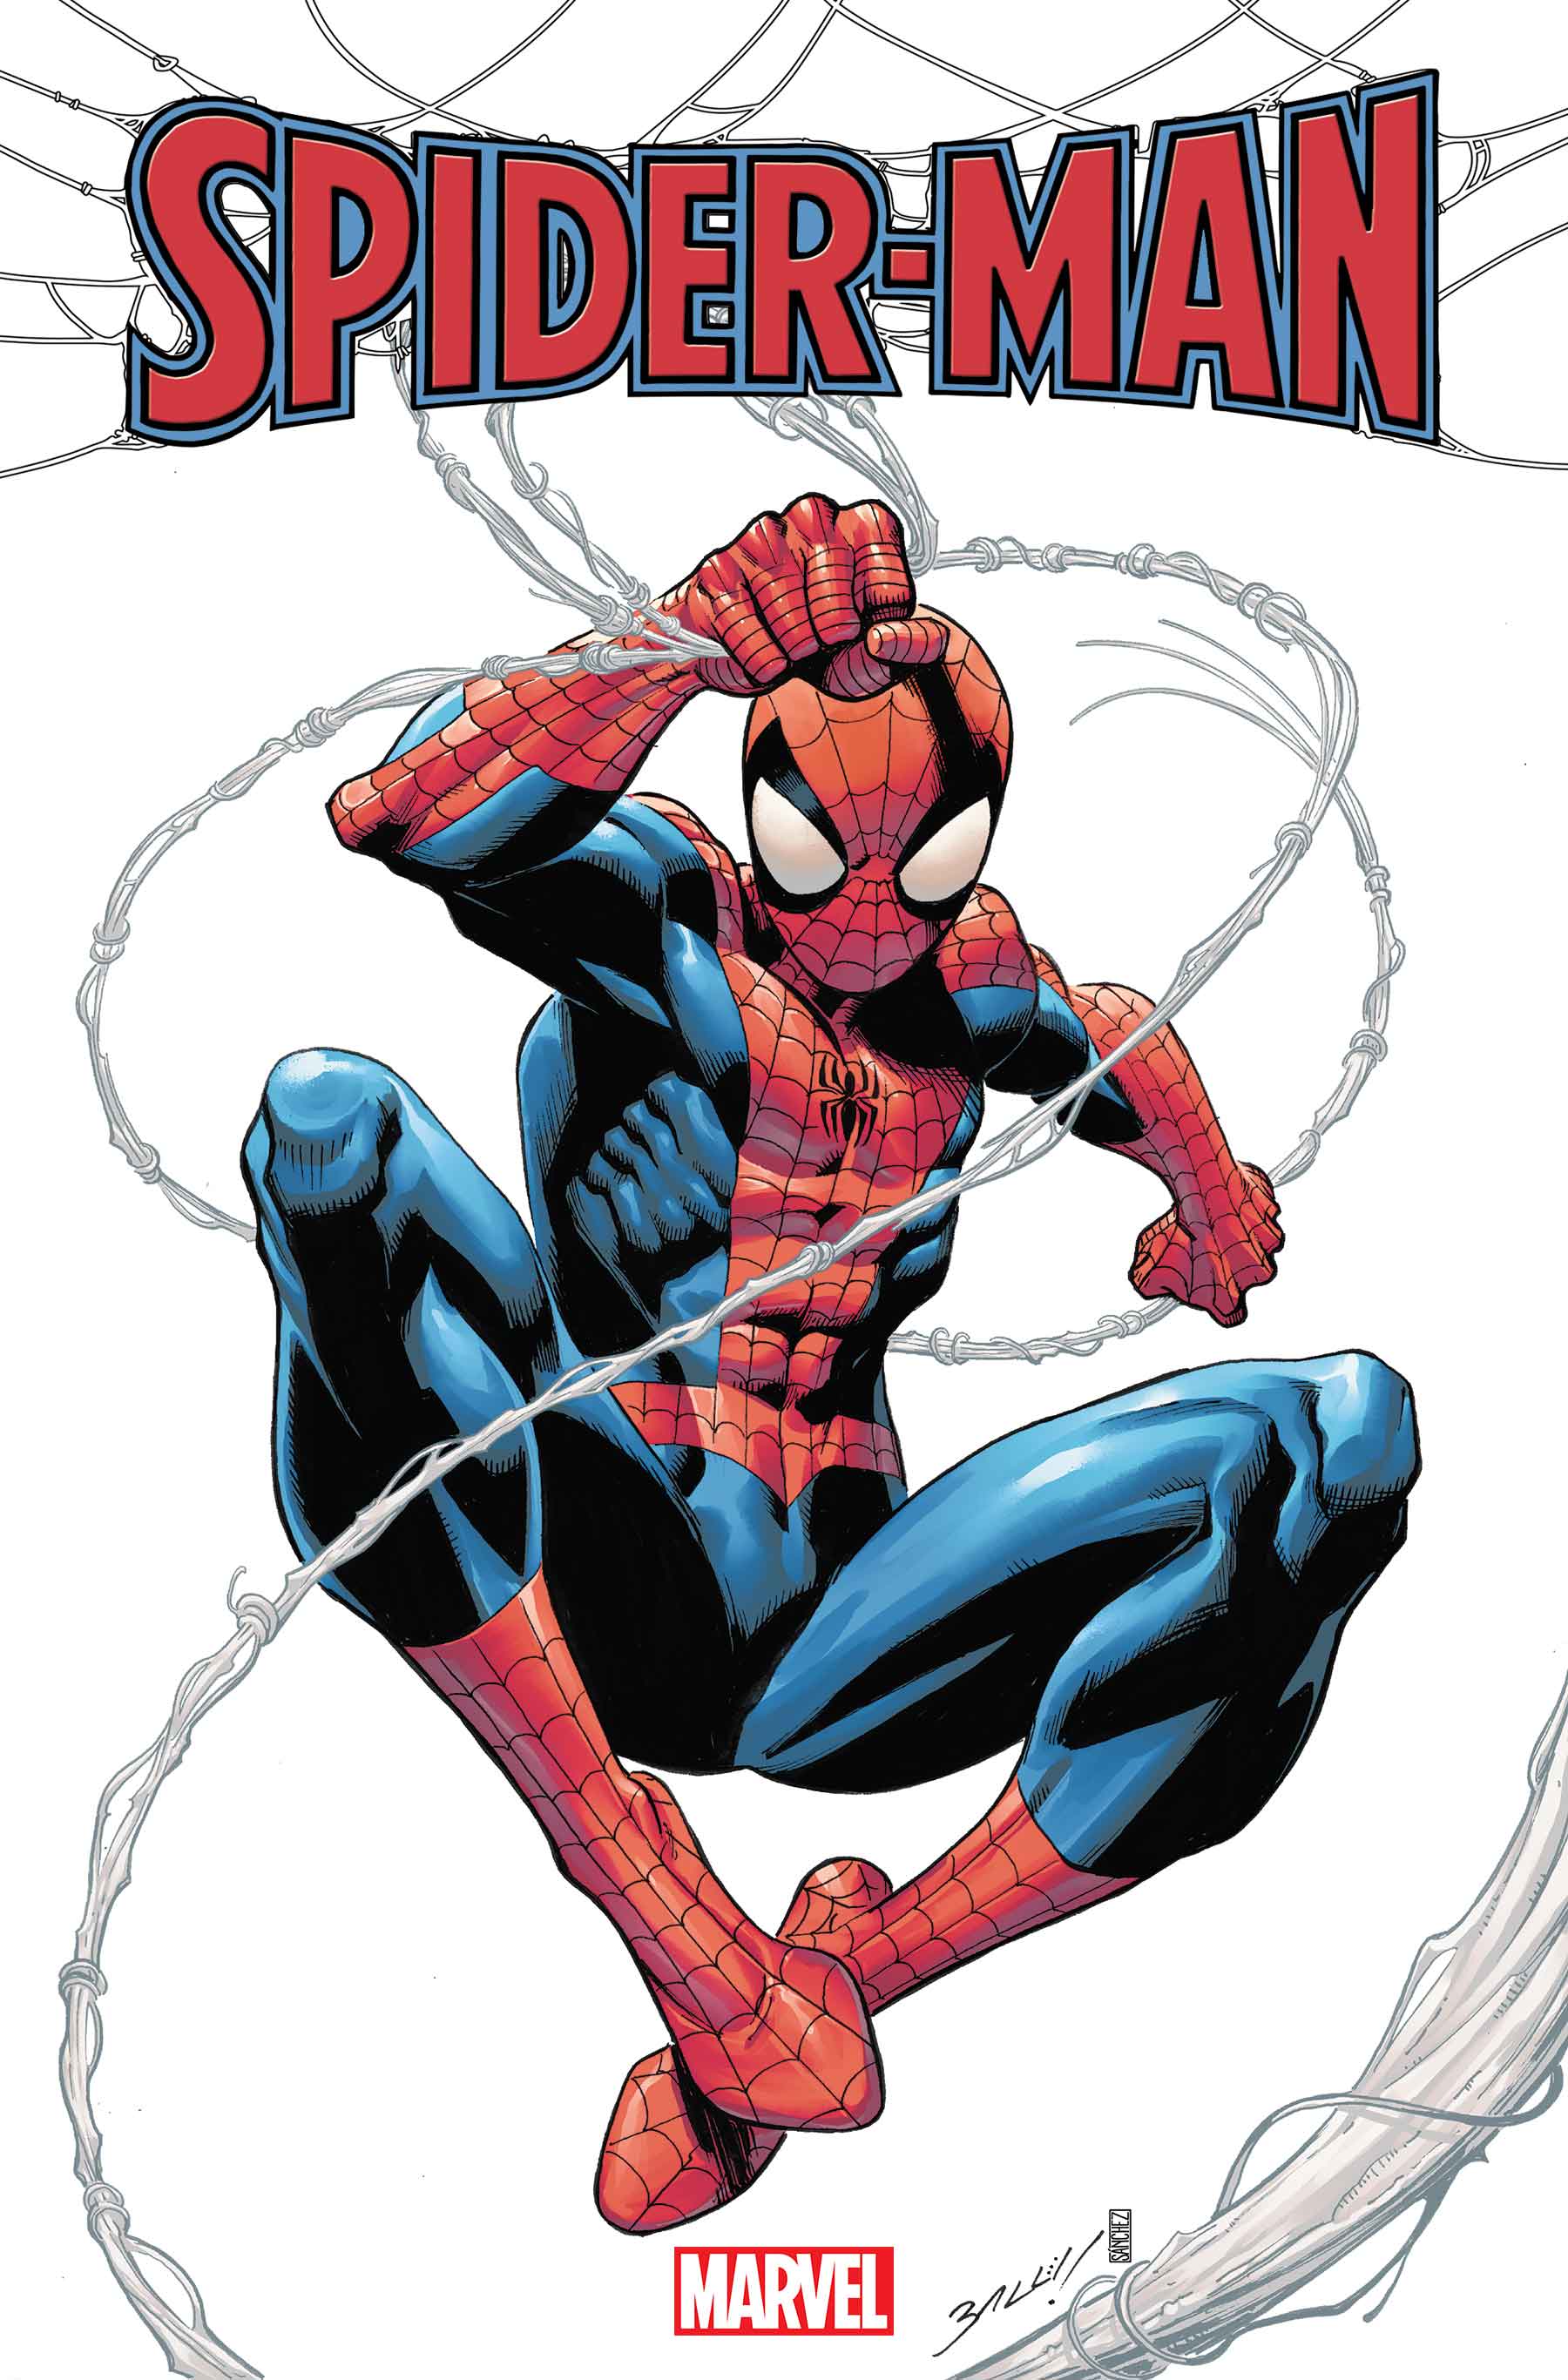 Spider-Man #1 preview by artist Mark Bagley